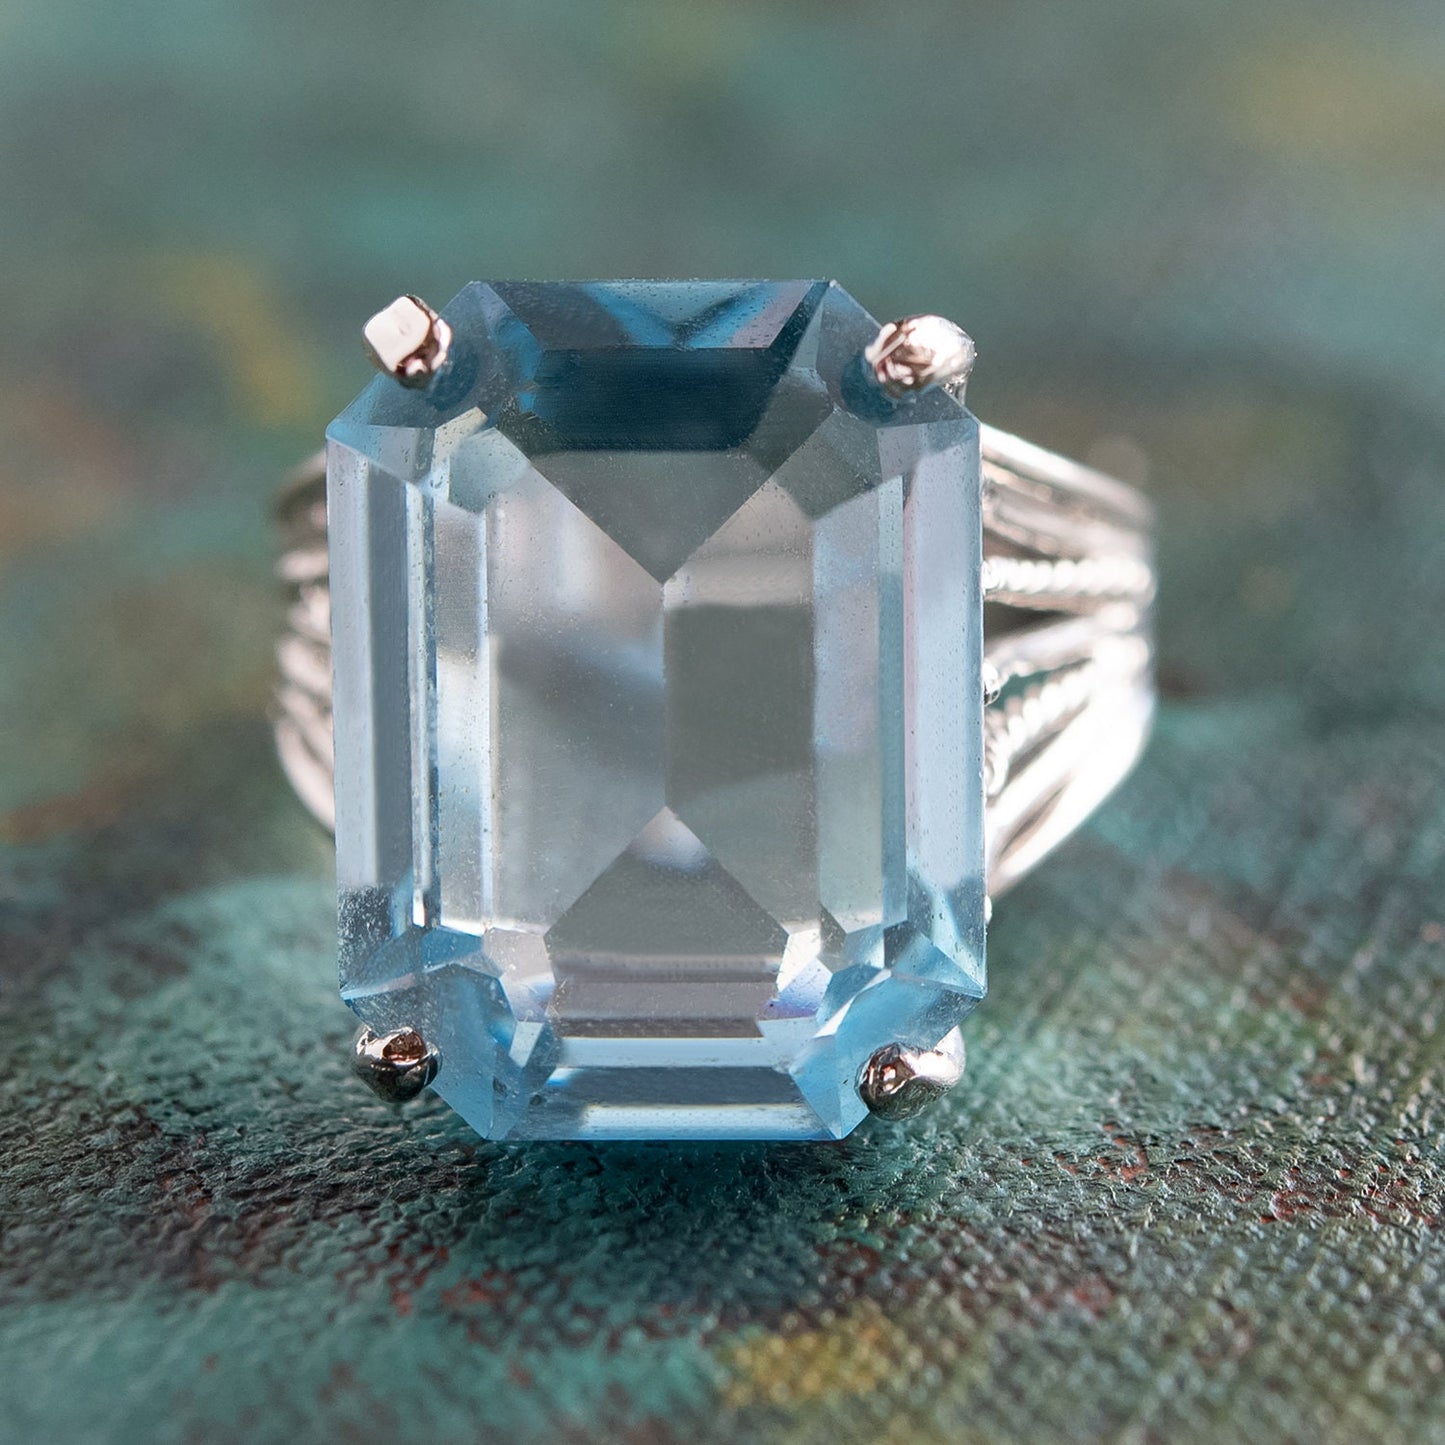 Vintage Ring 1970s Aquamarine Austrian Crystal 18k Gold Cocktail Ring #R694-AQW - Limited Stock - Never Worn